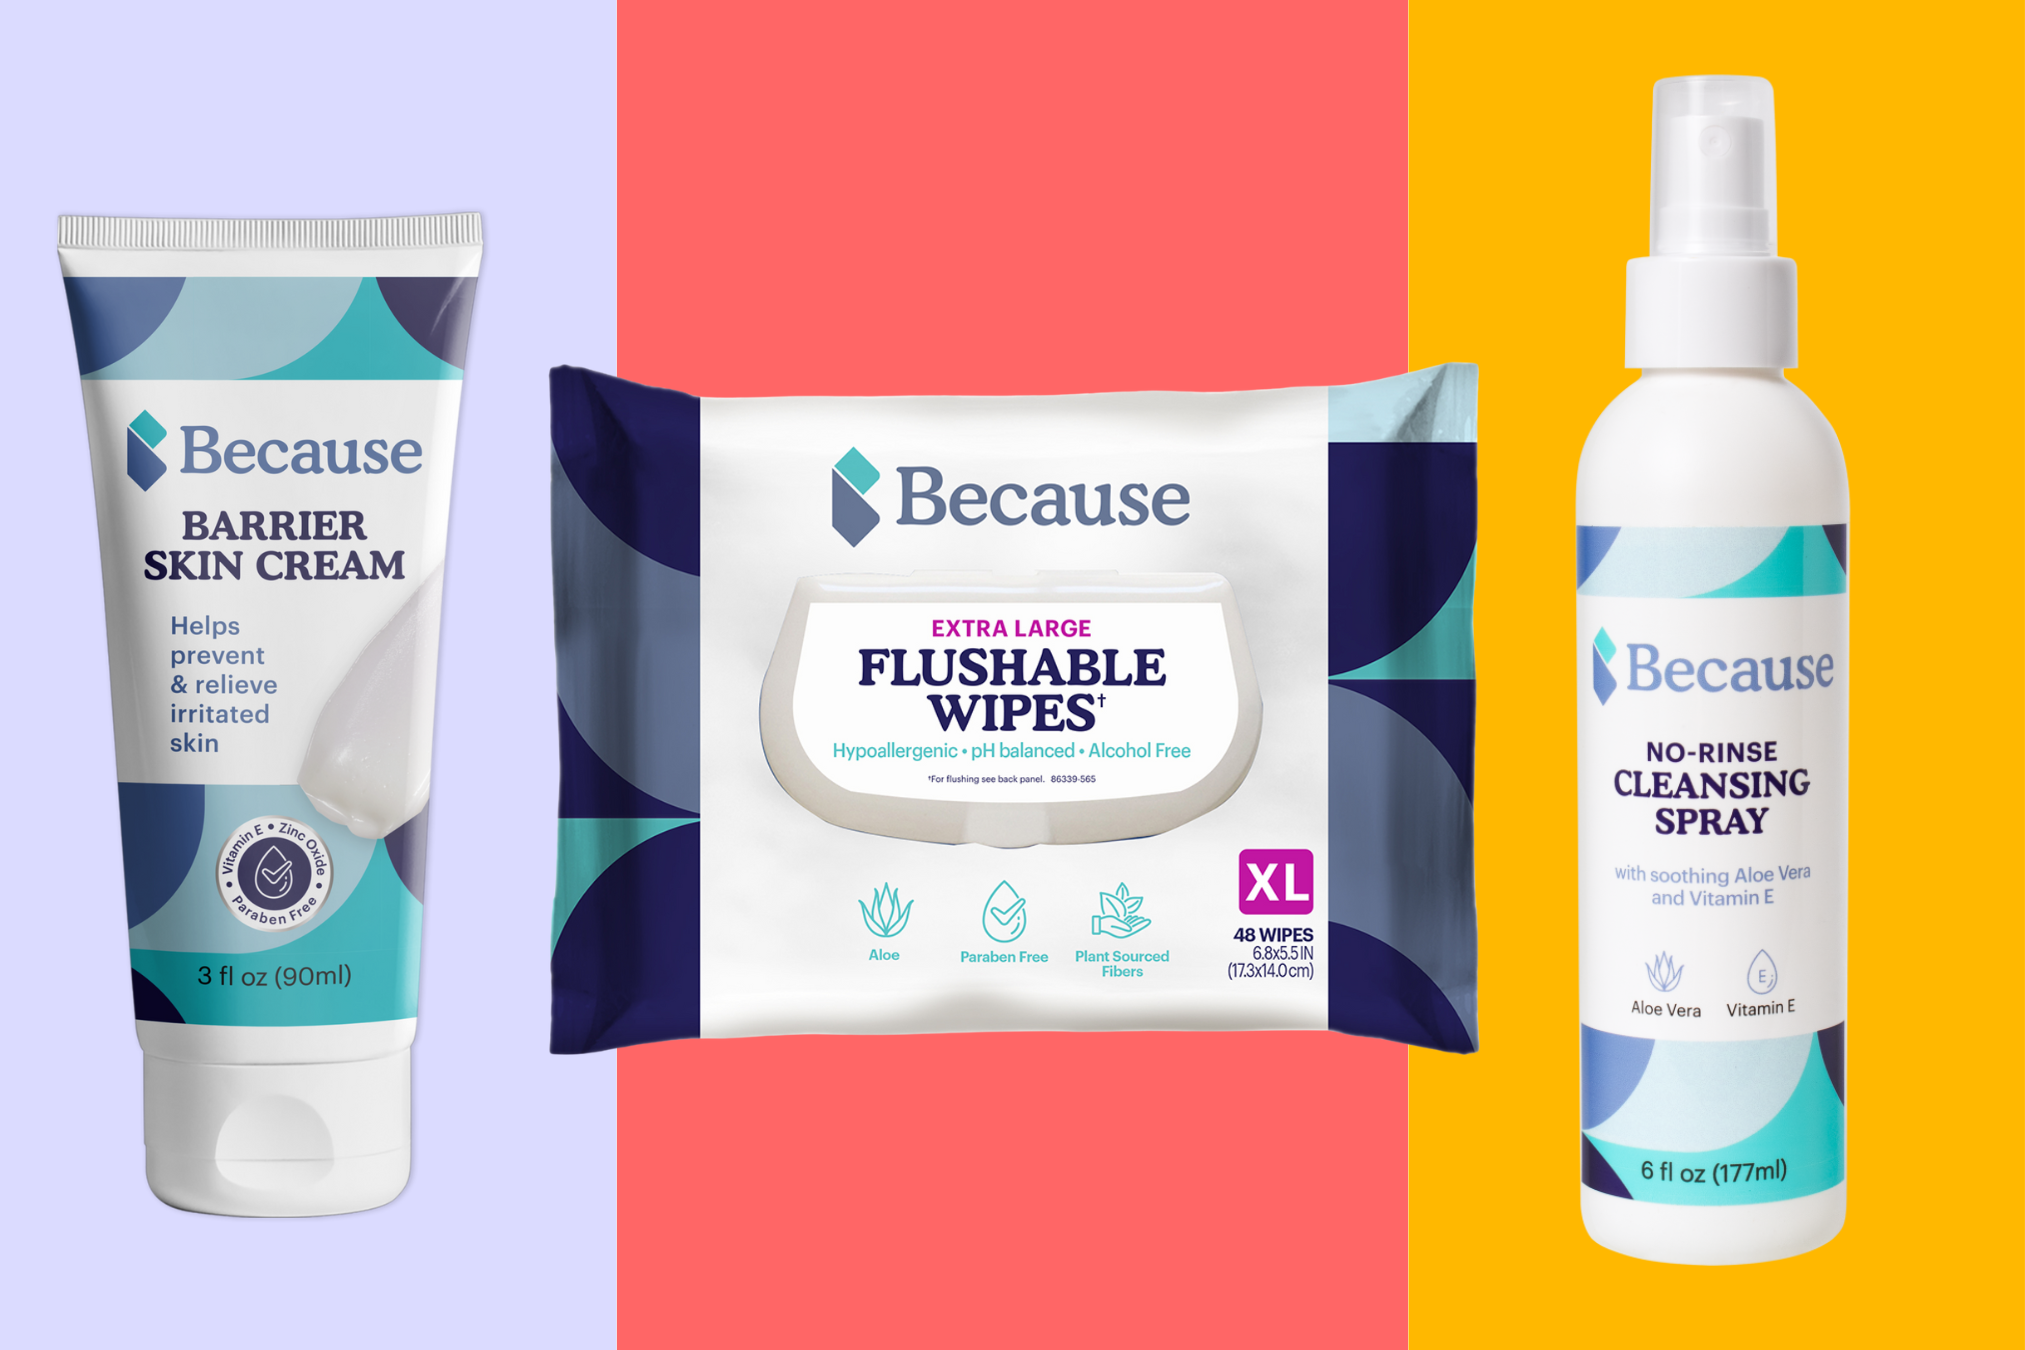 Barrier cream, flushable wipes, and no-rinse cleansing wipes